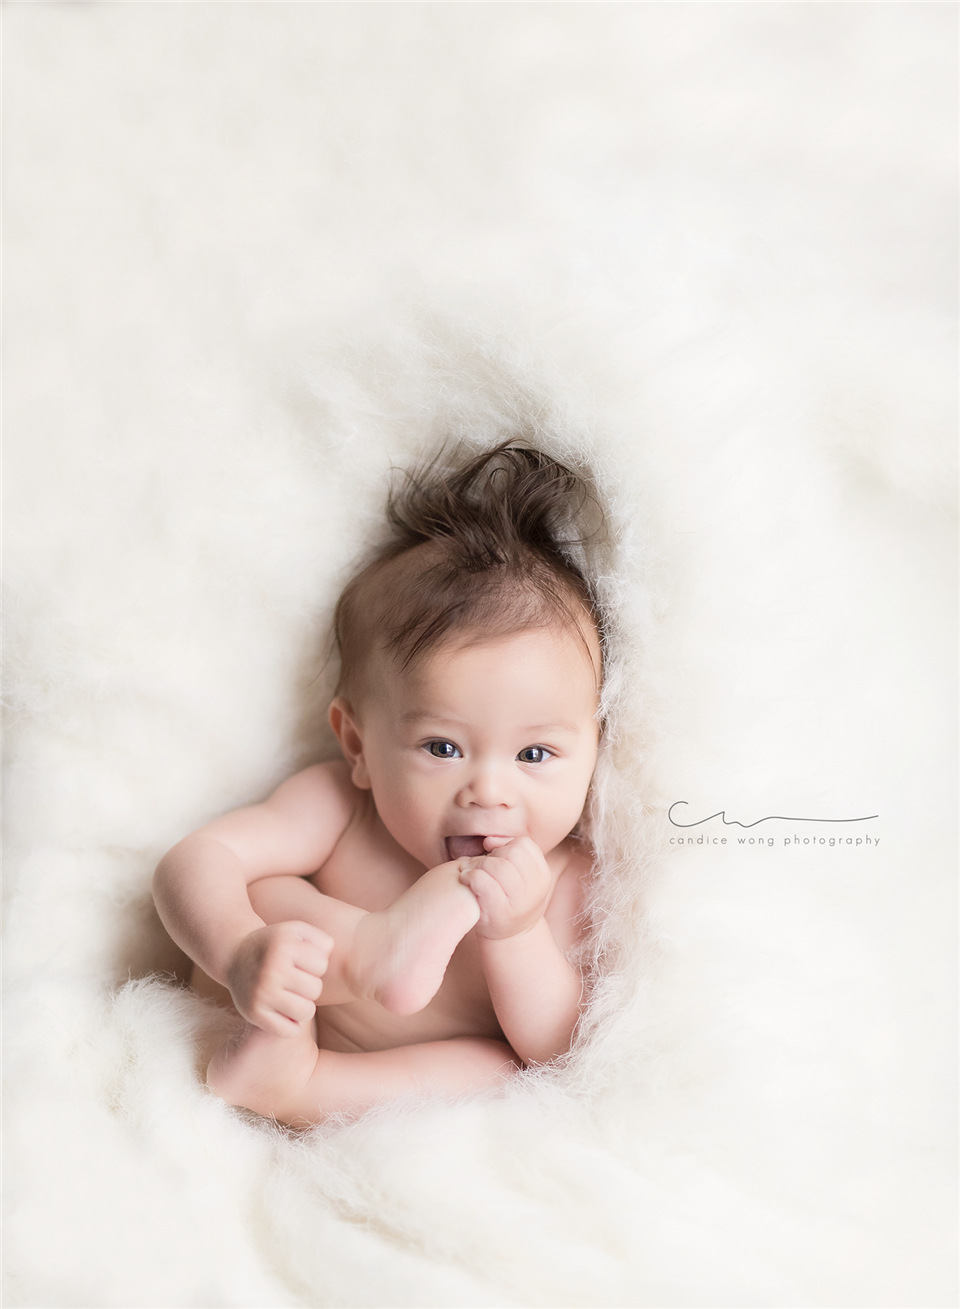 newborn photography community critique photo submitted by Candice Wong - 4 community members set this photo as a favourite image.